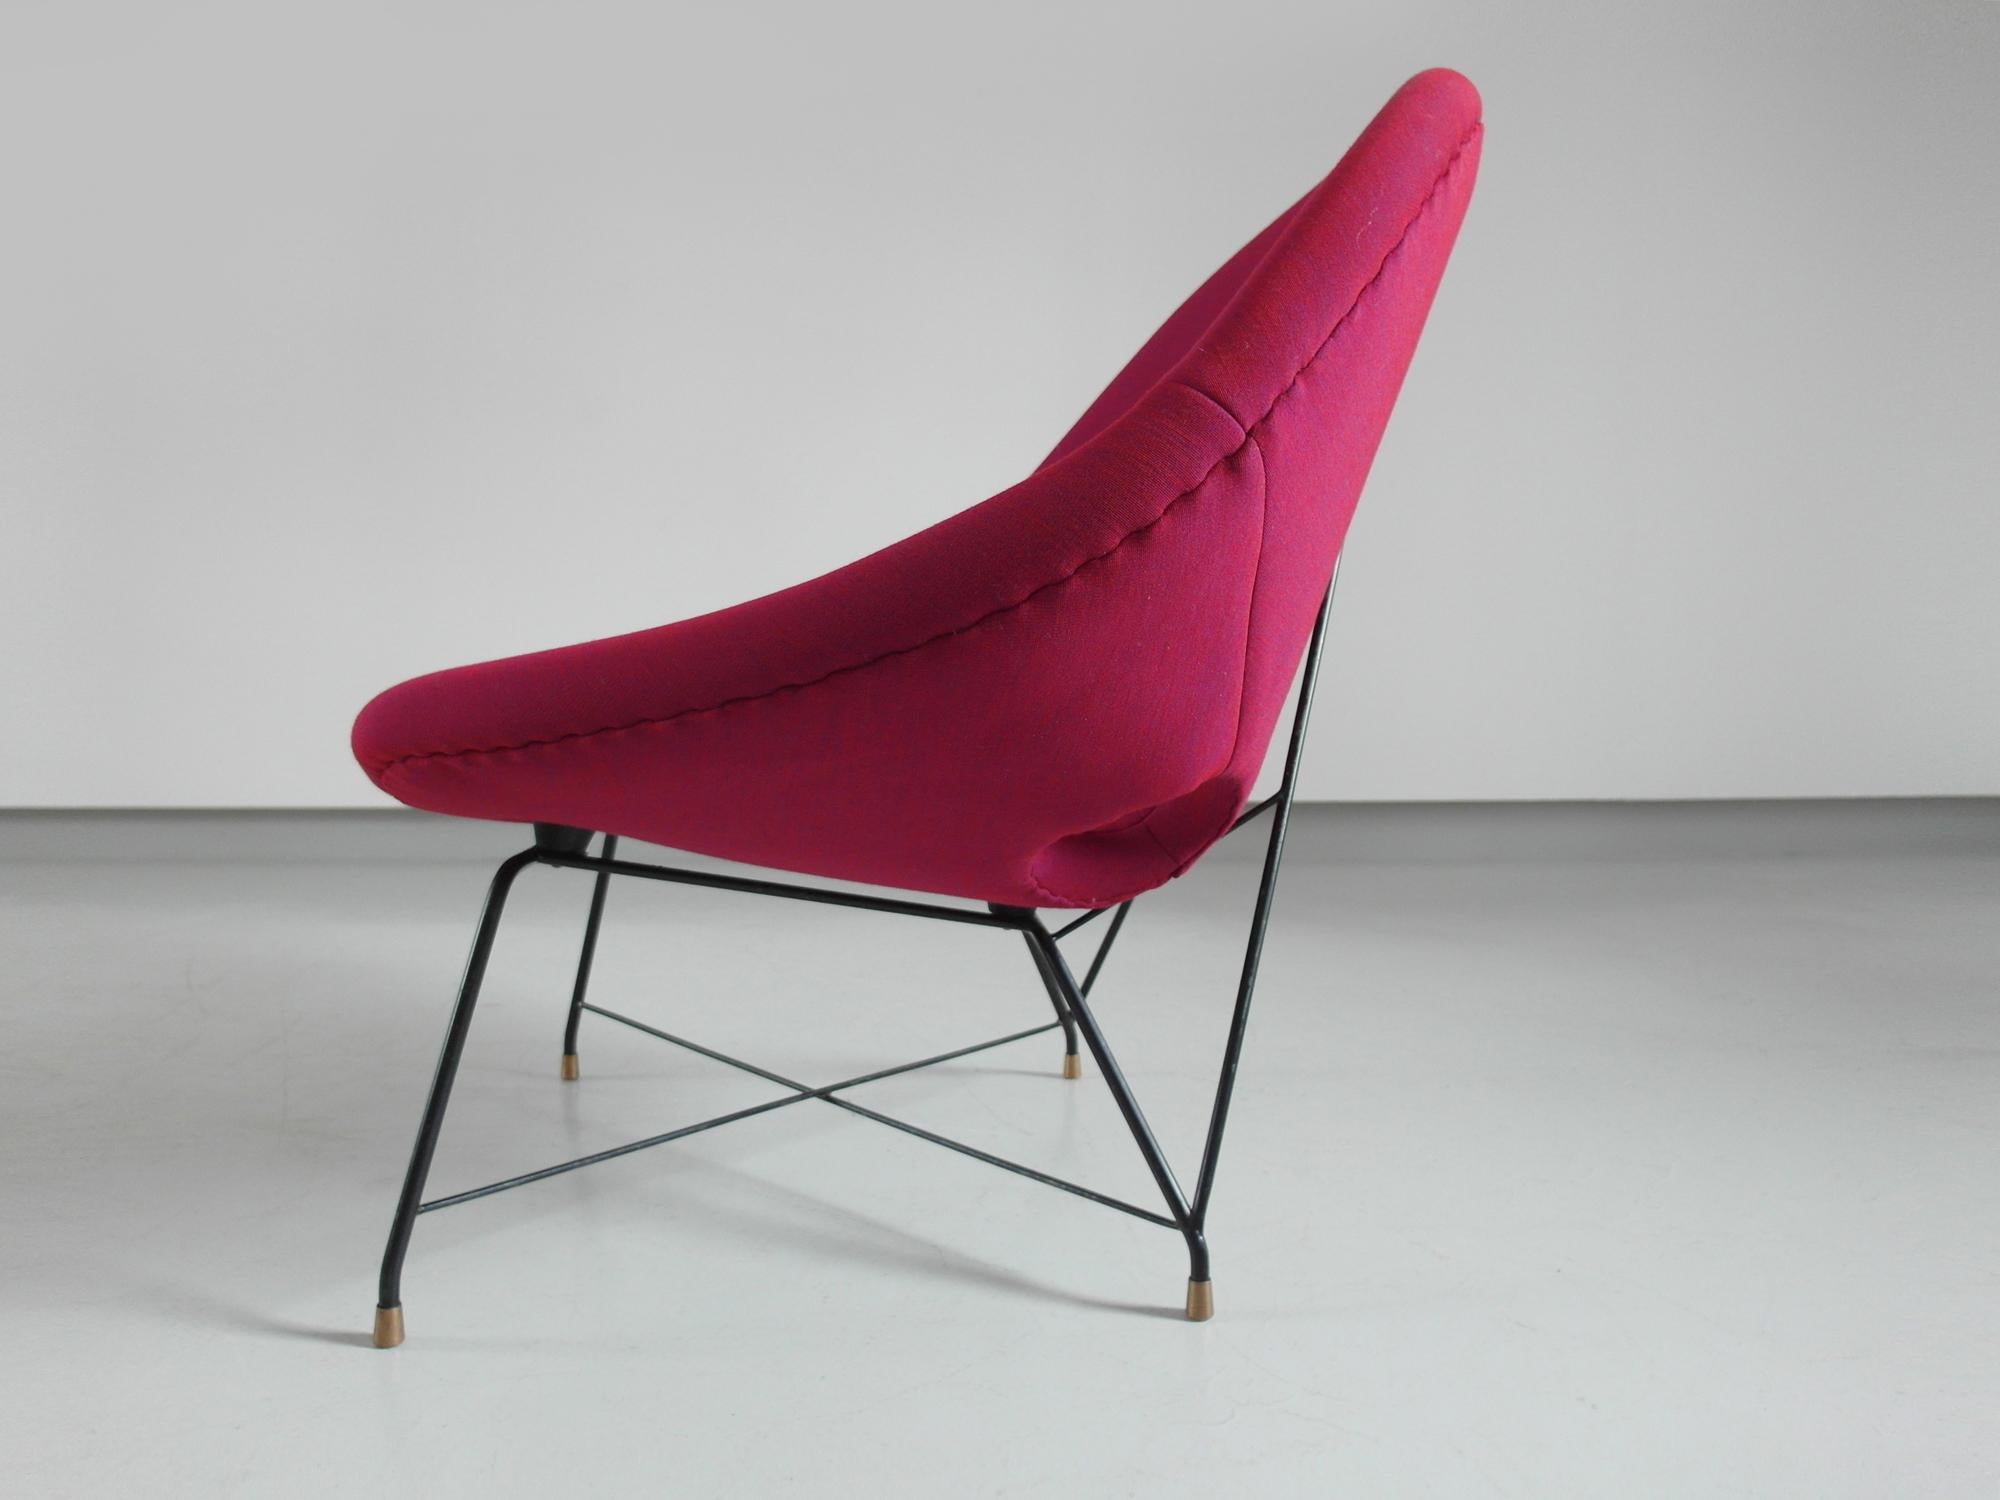 Pair of Cosmos Chairs in Ruby red/ Raspberry red by Augusto Bozzi for Saporiti For Sale 3